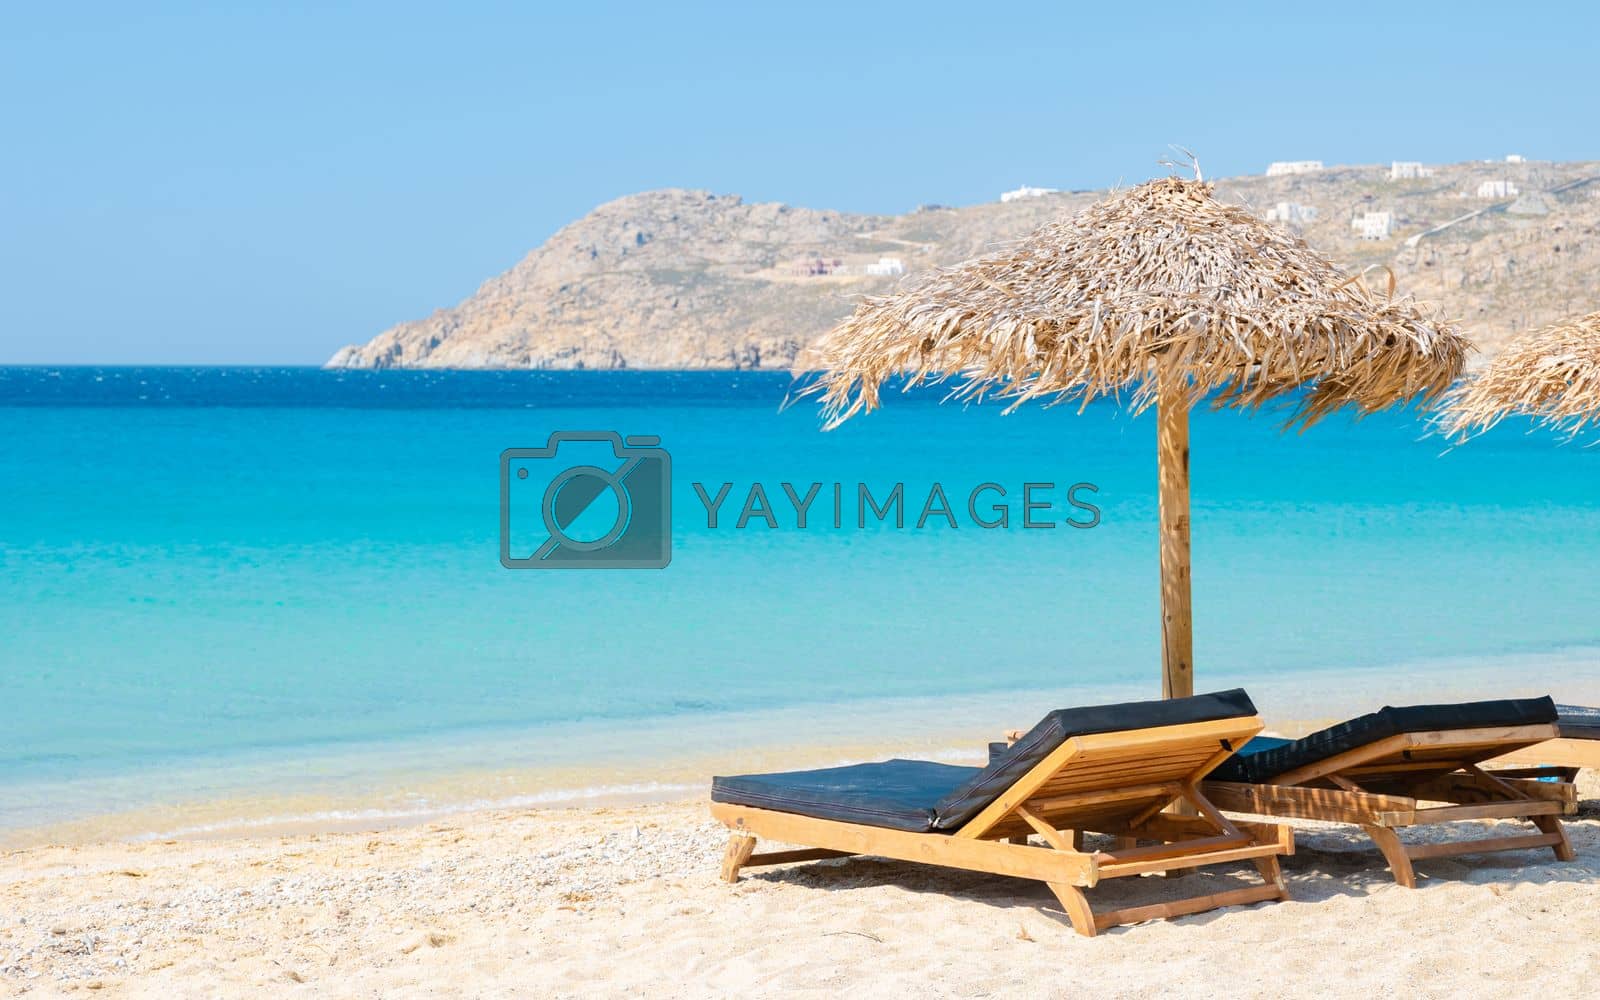 Royalty free image of Mykonos beach during summer with umbrella and luxury beach chairs beds, blue ocean at Elia beach by fokkebok